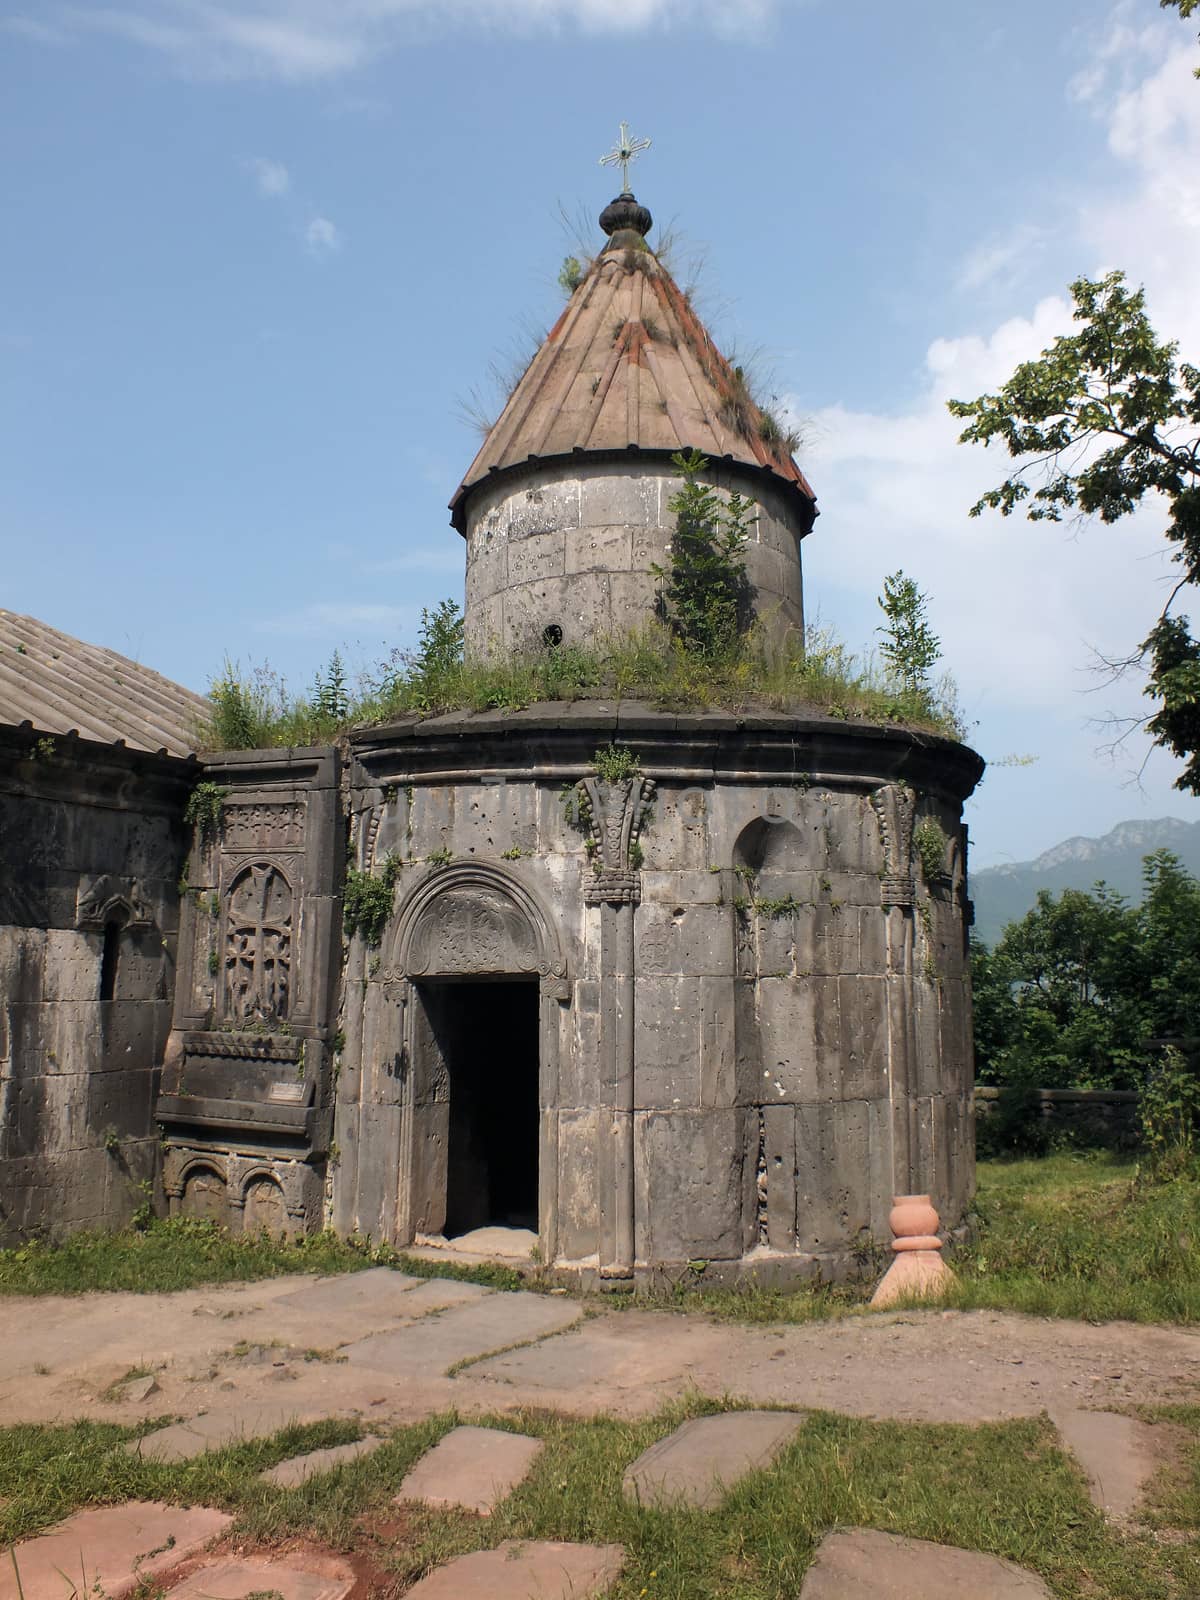 This late 10th century chapel  is a miniature dome structure is circular on the outside. The combination of arched niches, and delicately ornamented narrow windows create a sense of movement to an otherwise stoic structure.